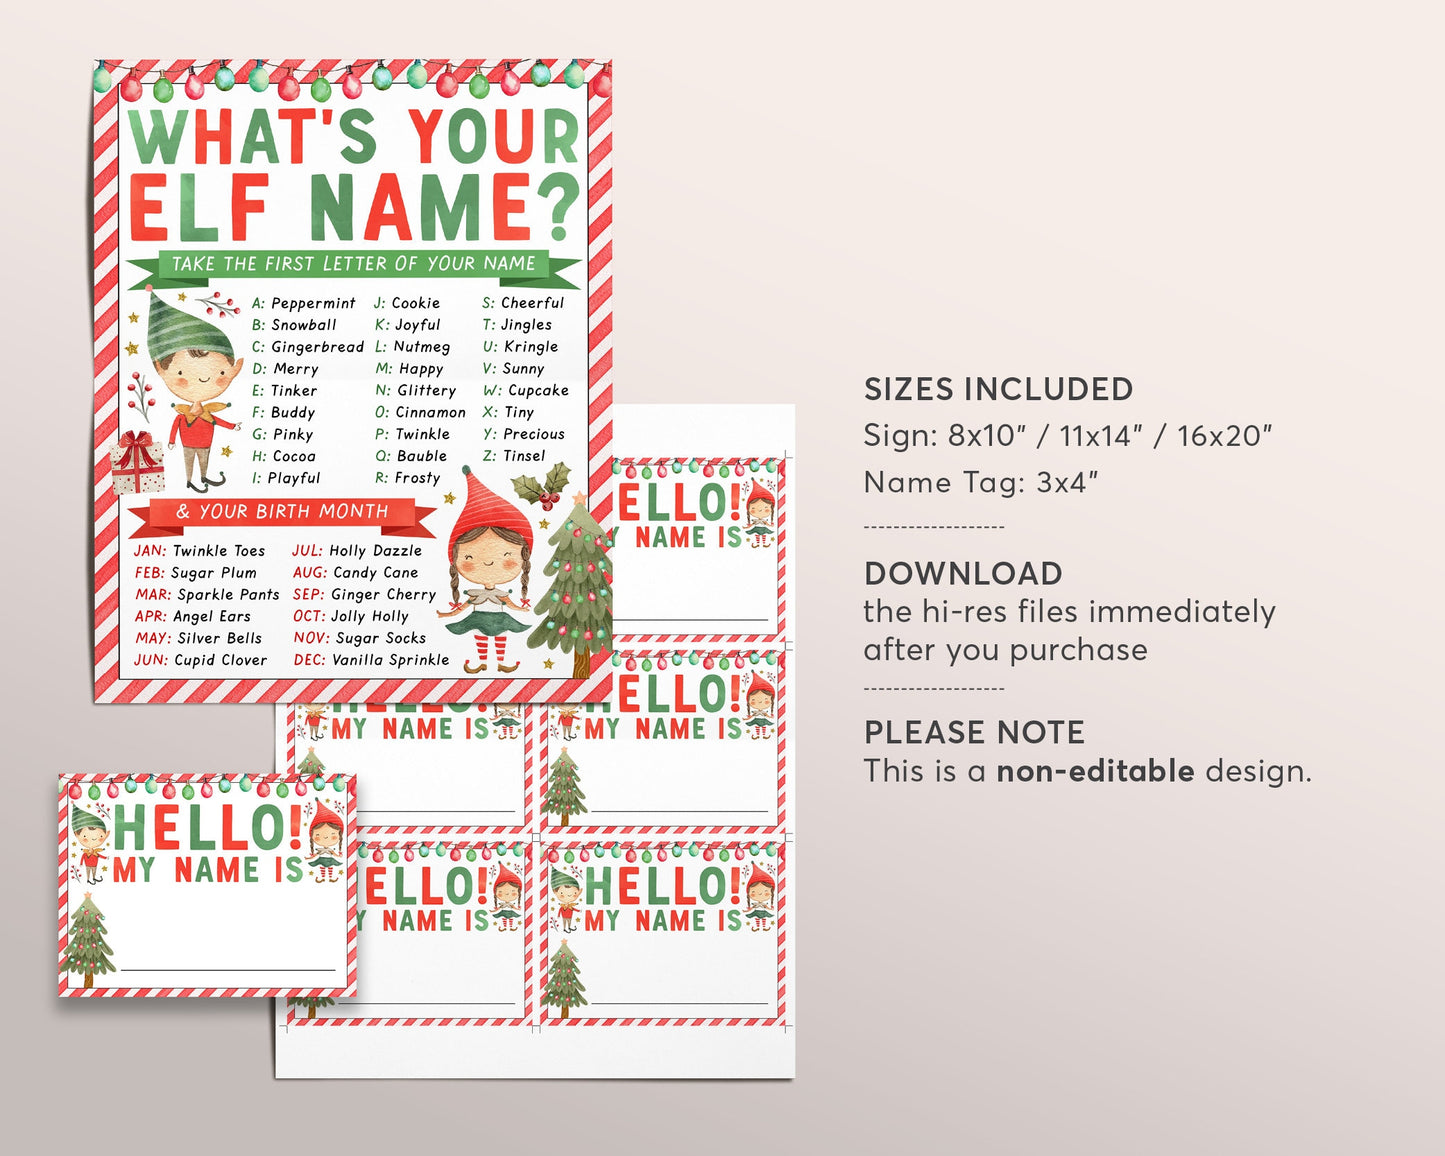 What's your Elf Name Game, Elves Christmas Party Activity Game With Name Tags Sign Printable, Christmas Eve Box Holiday Winter Activity Kids